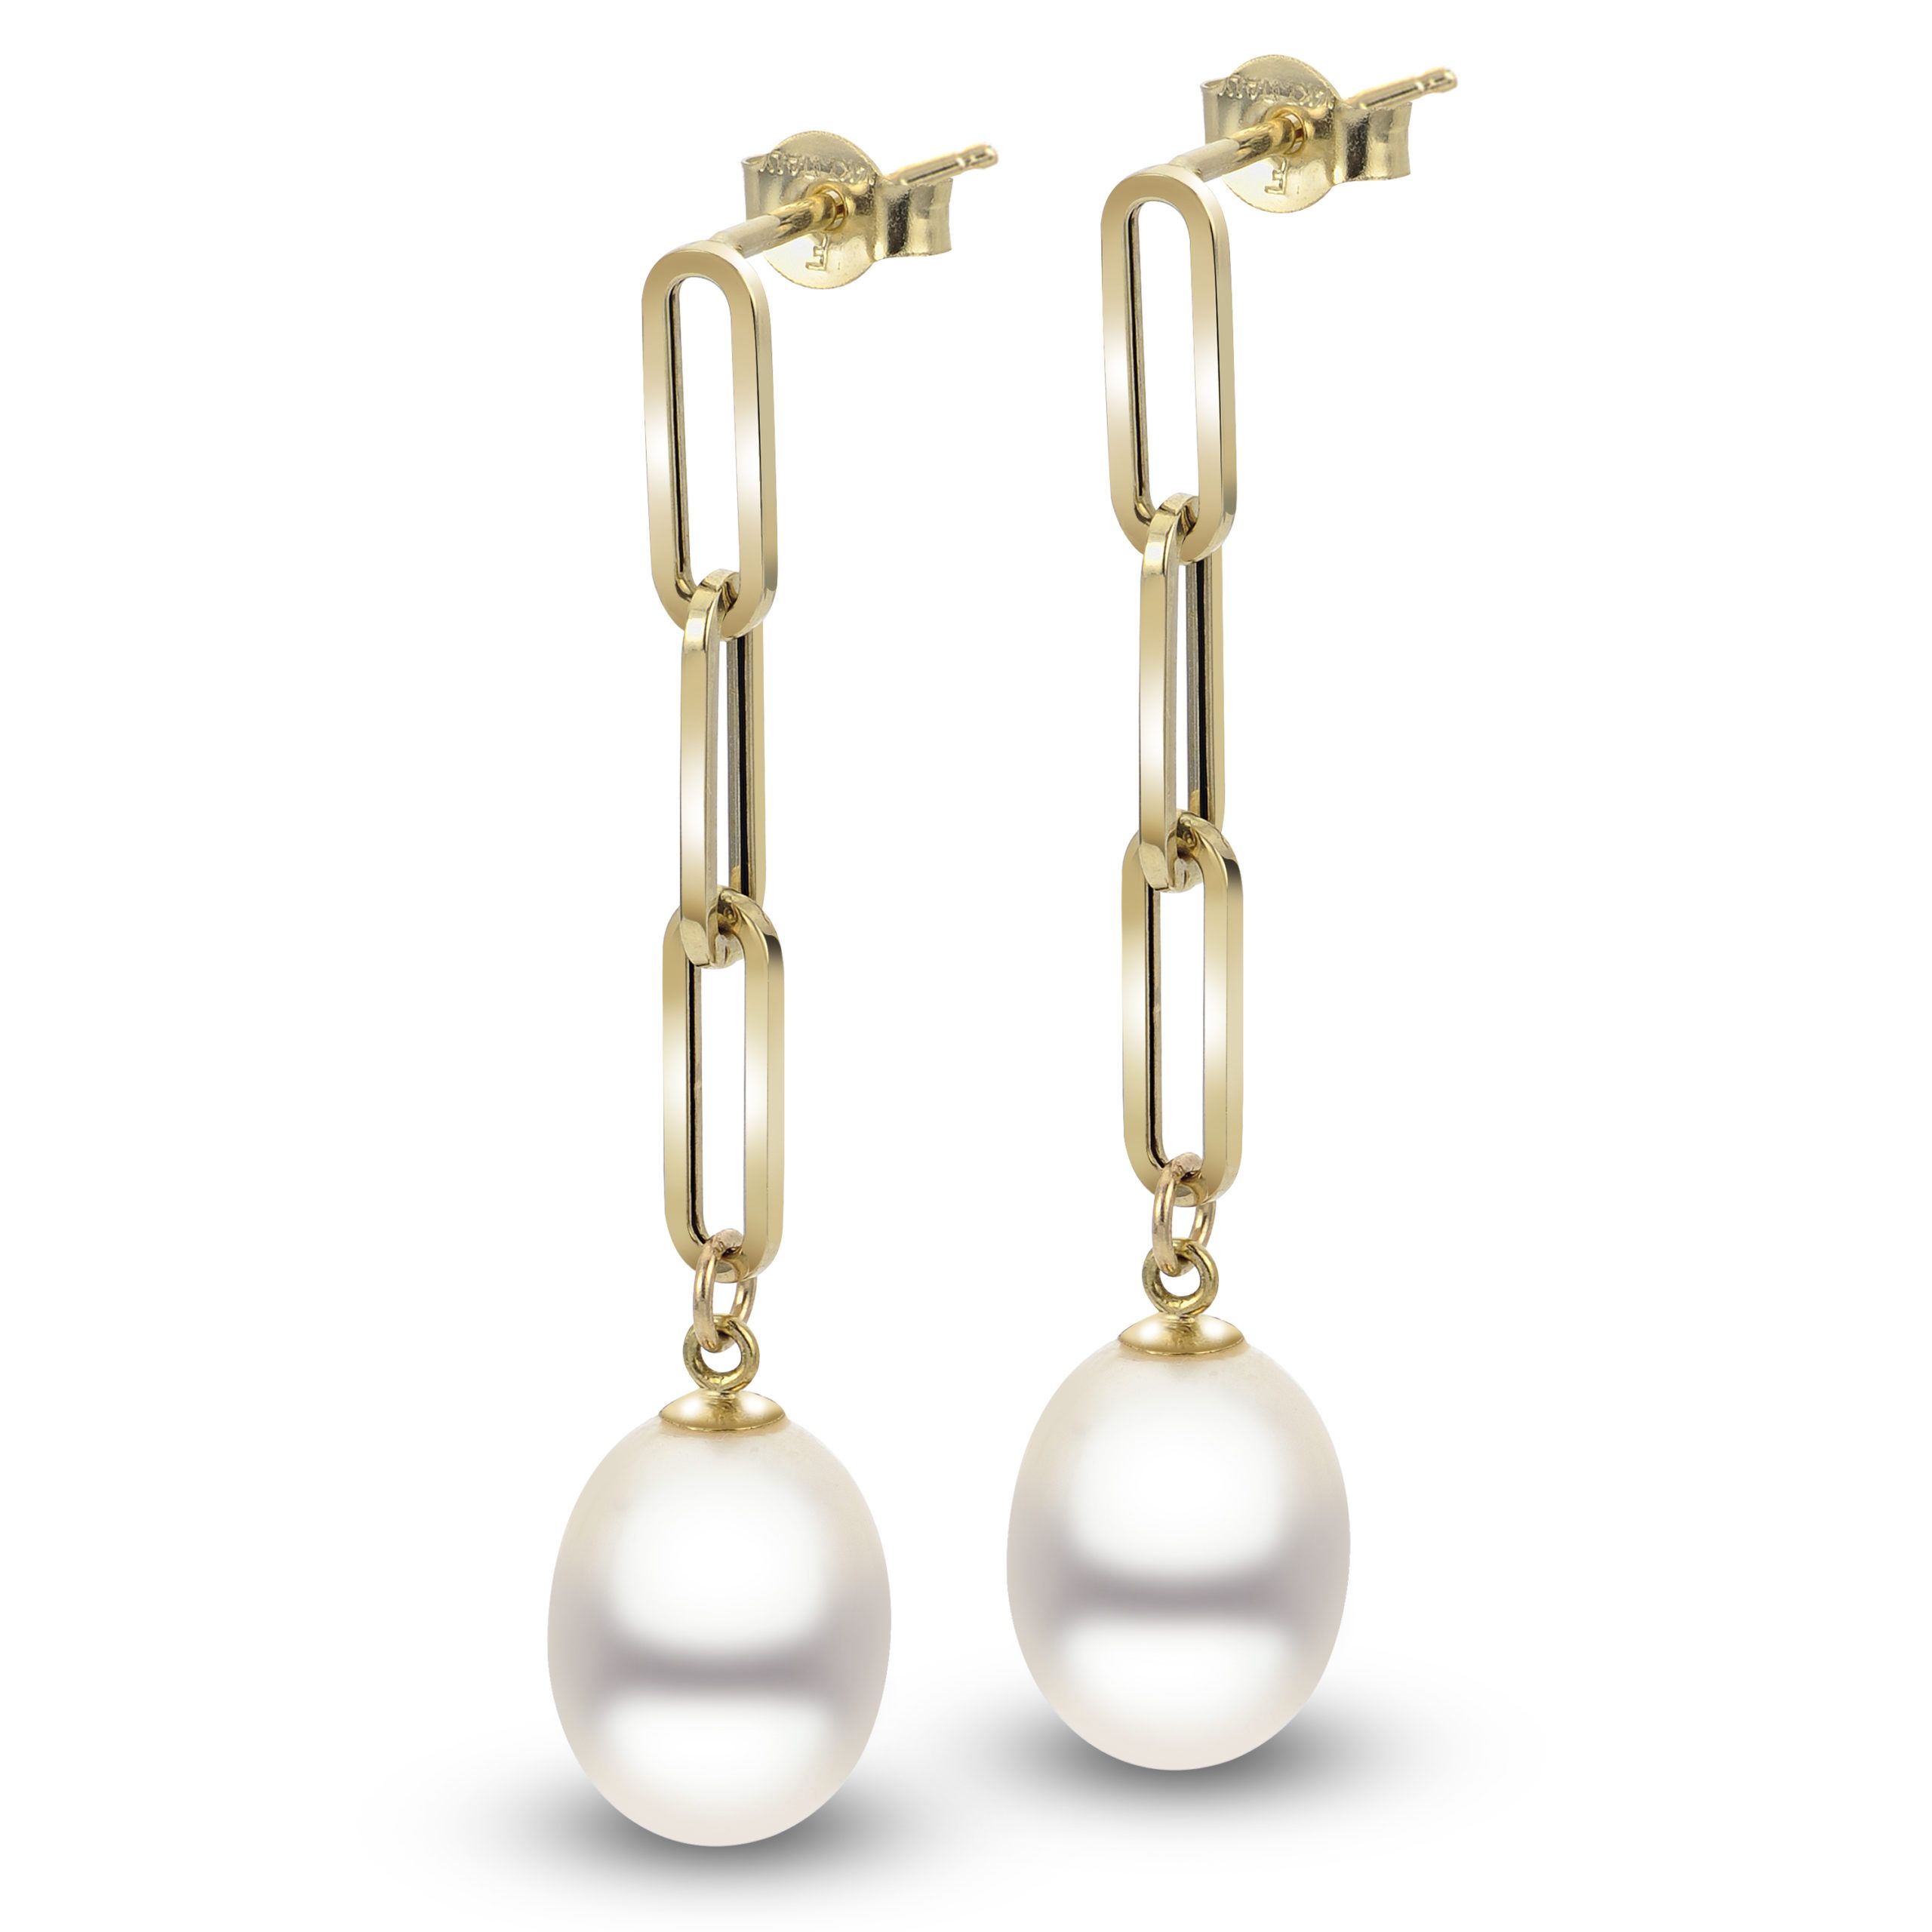 TRENDS IN PEARLS